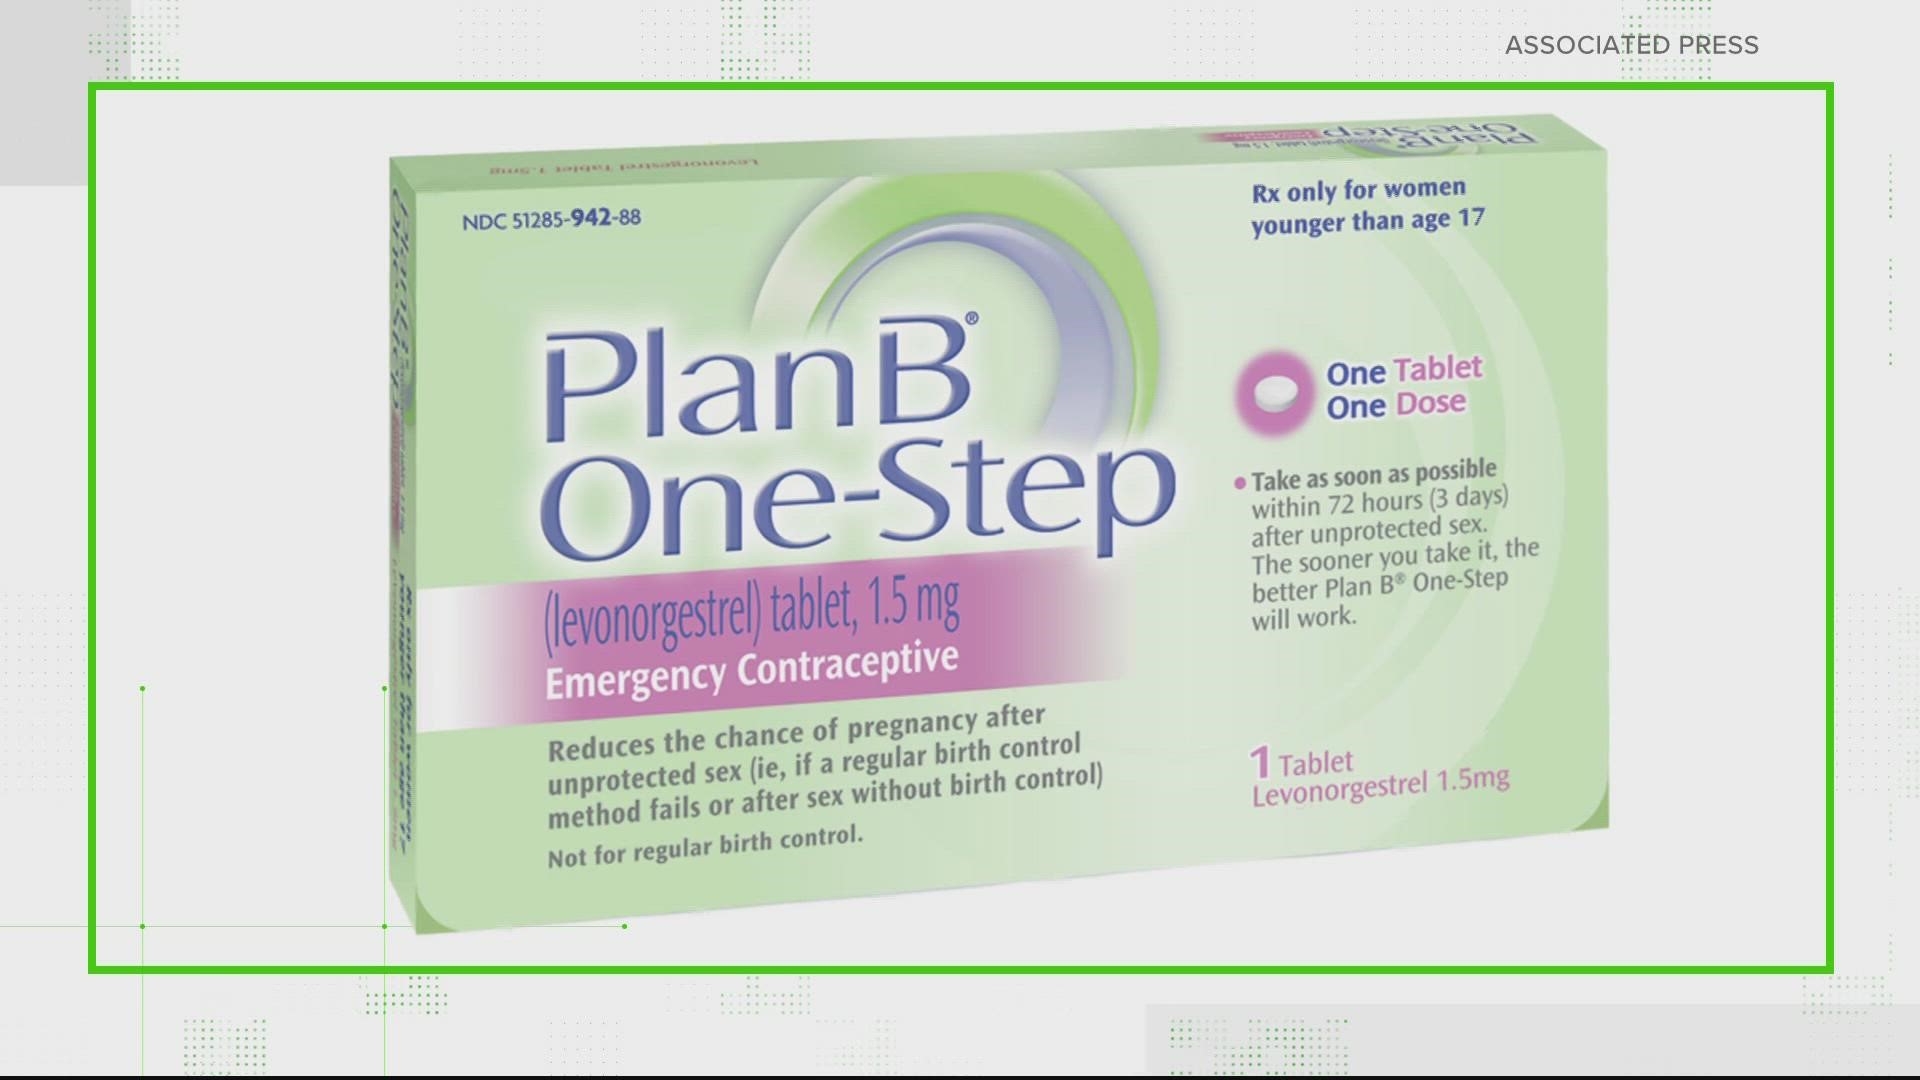 When Does Plan B Work